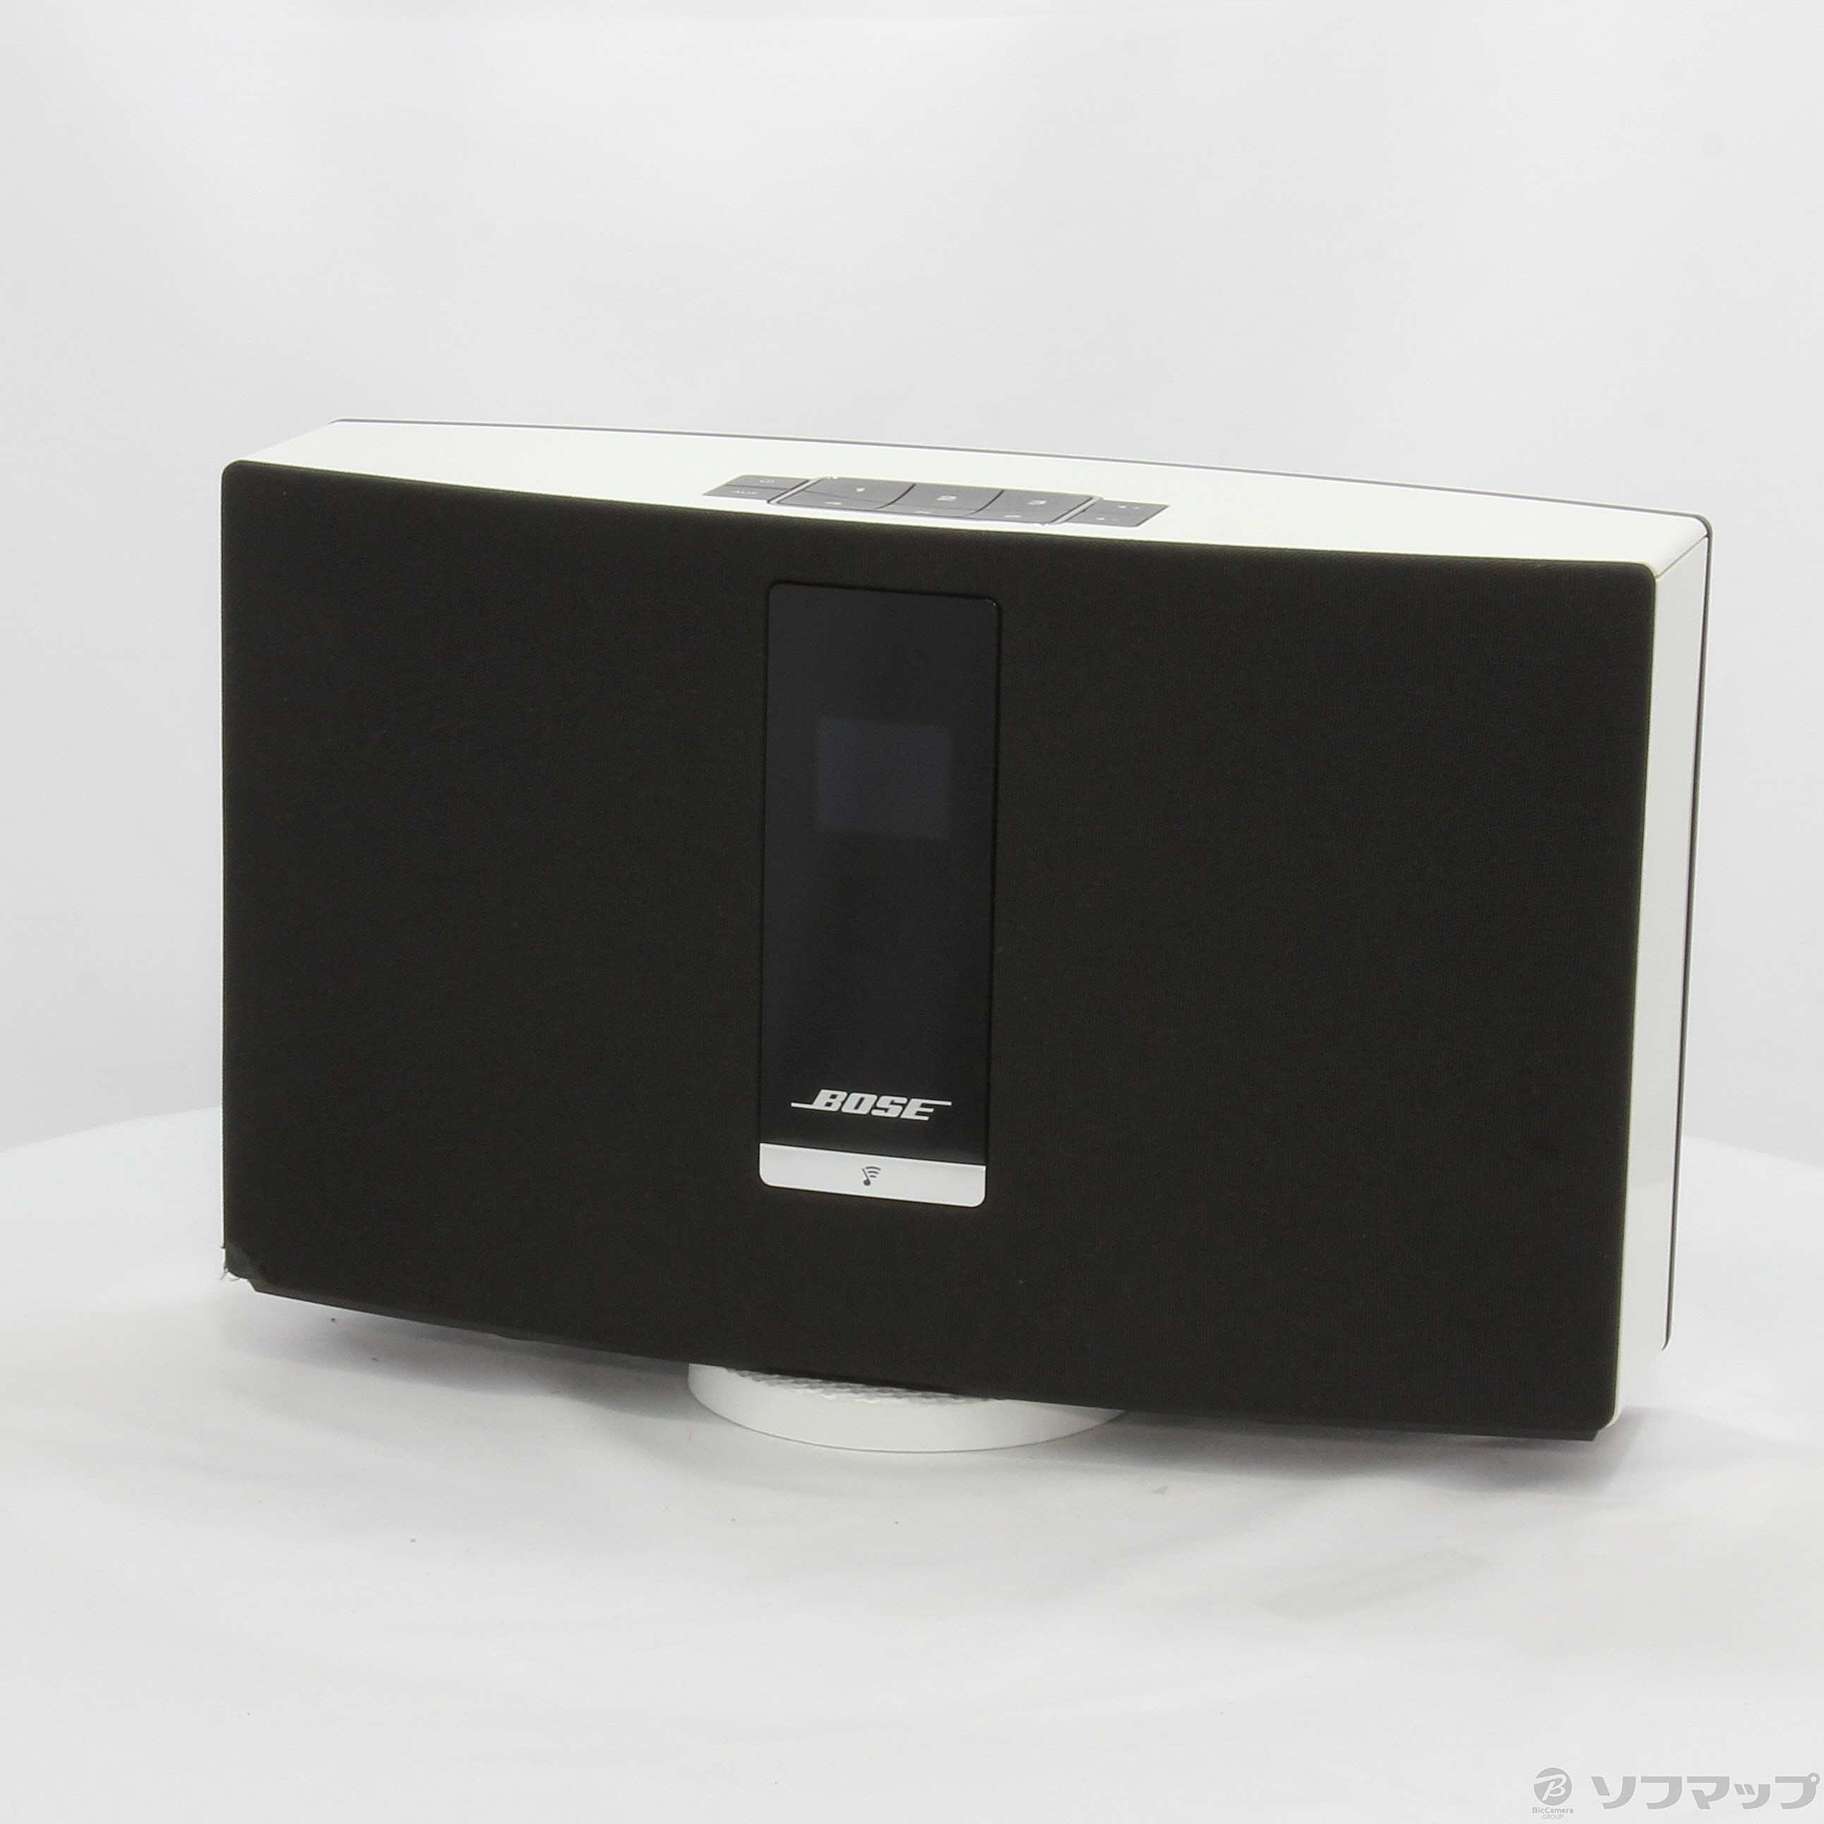 Bose SoundTouch 20 Wi-Fi music system